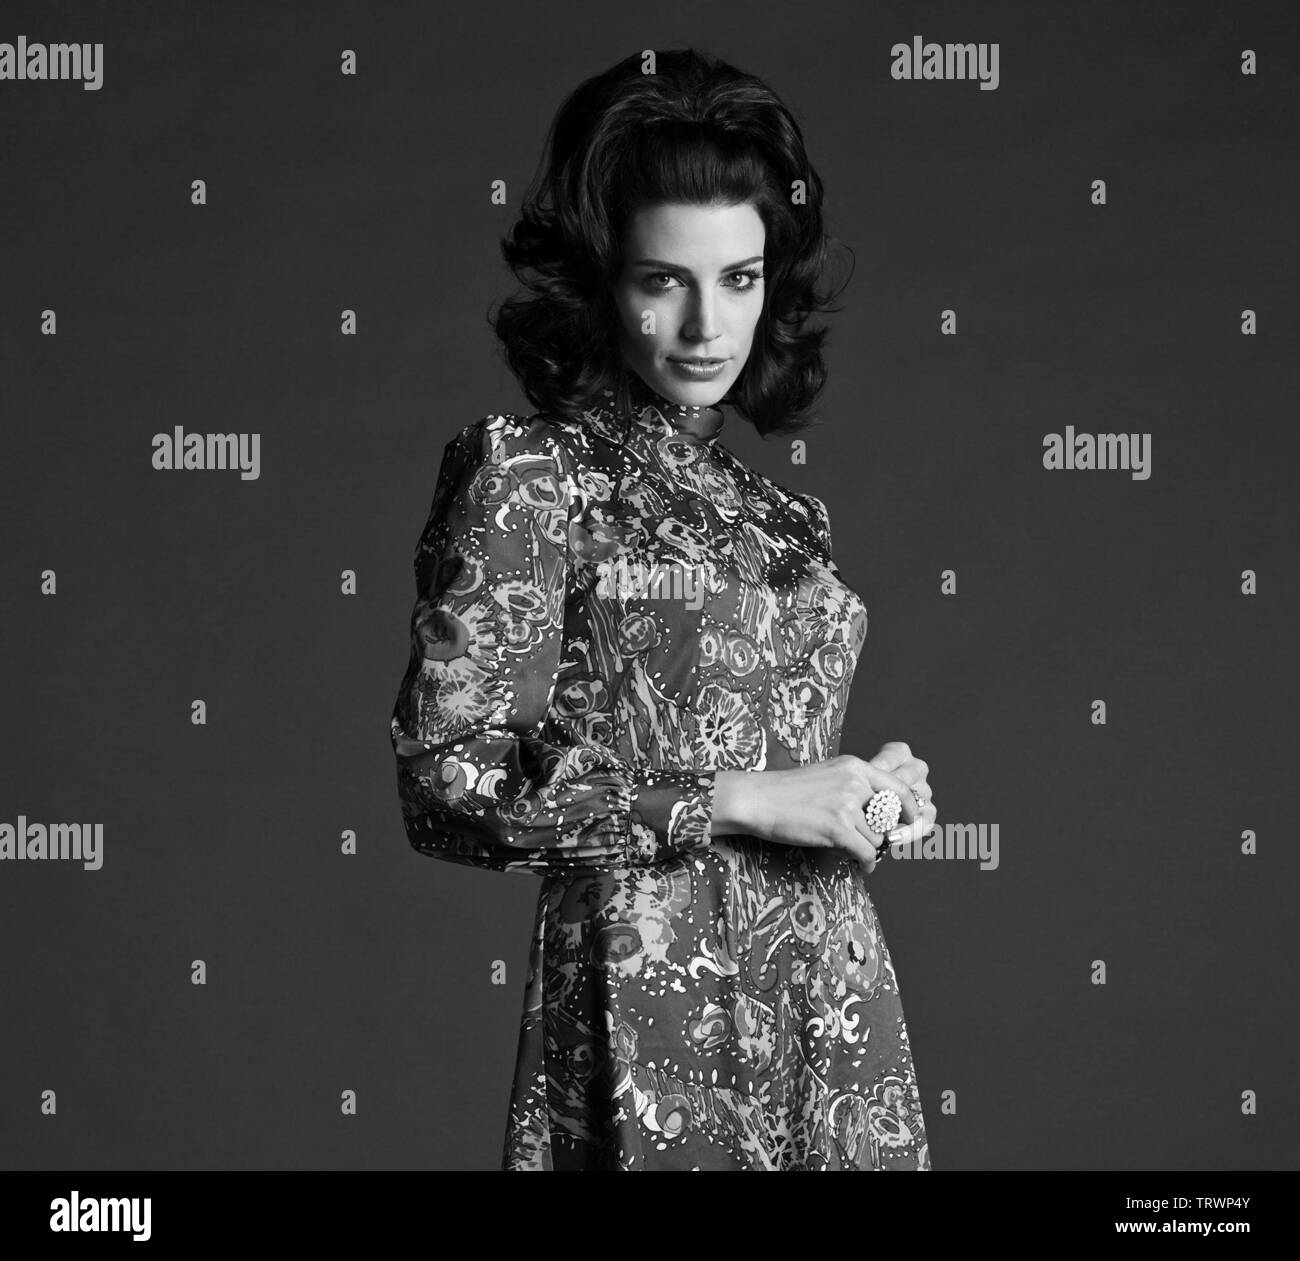 JESSICA PARE in MAD MEN (2007). Copyright: Editorial use only. No merchandising or book covers. This is a publicly distributed handout. Access rights only, no license of copyright provided. Only to be reproduced in conjunction with promotion of this film. Credit: AMERICAN MOVIE CLASSICS (AMC)/RADICAL MEDIA / Album Stock Photo